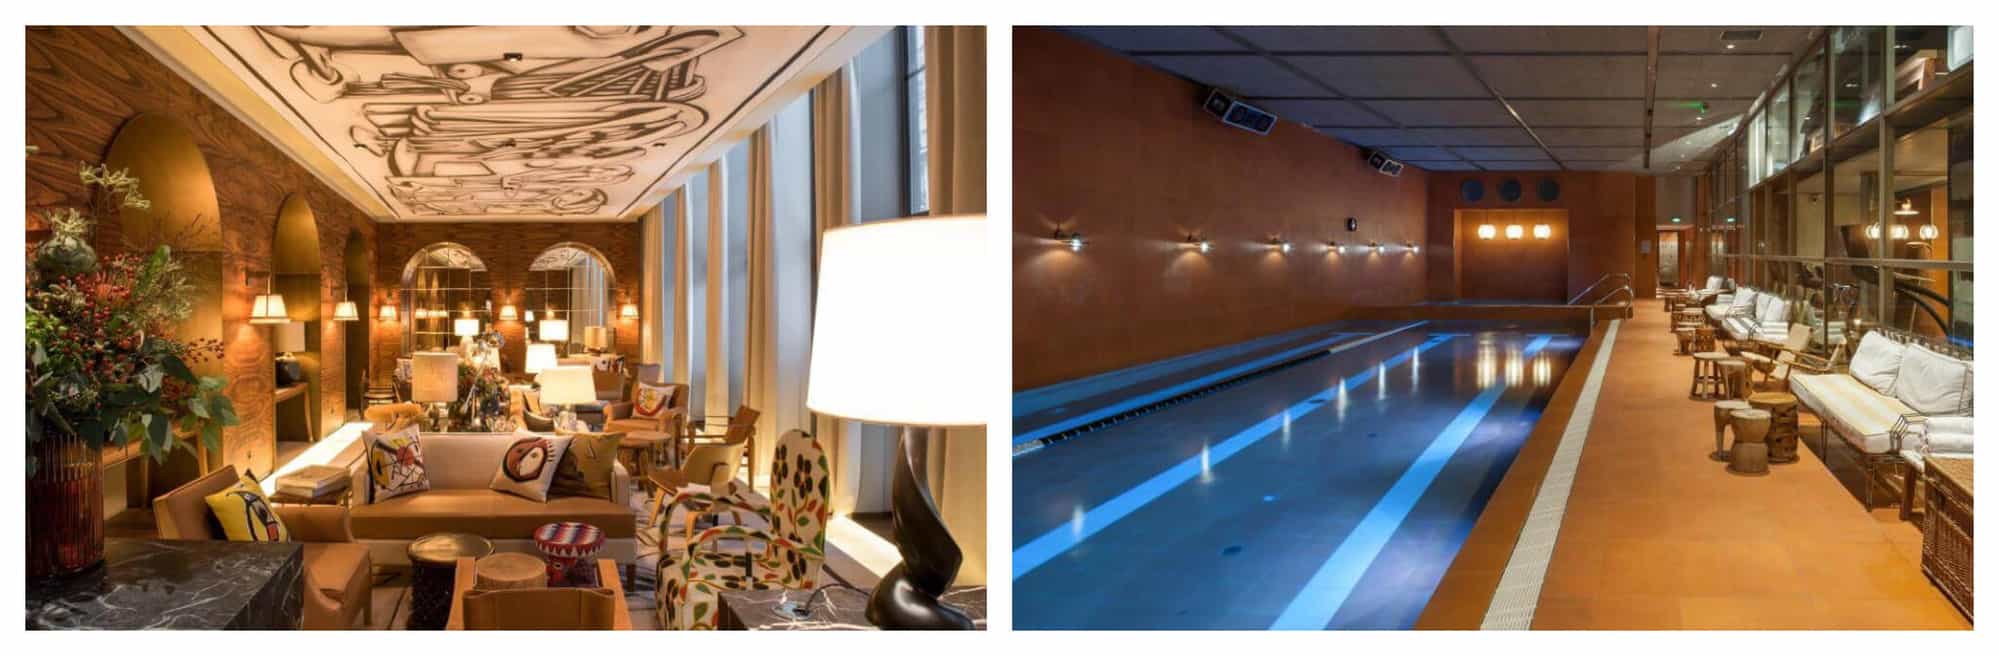 The extravagantly decorated lounge at Brach has ambient lighting and colourful soft furnishings. The long blue pool has a mirrored wall and loungers alongside.